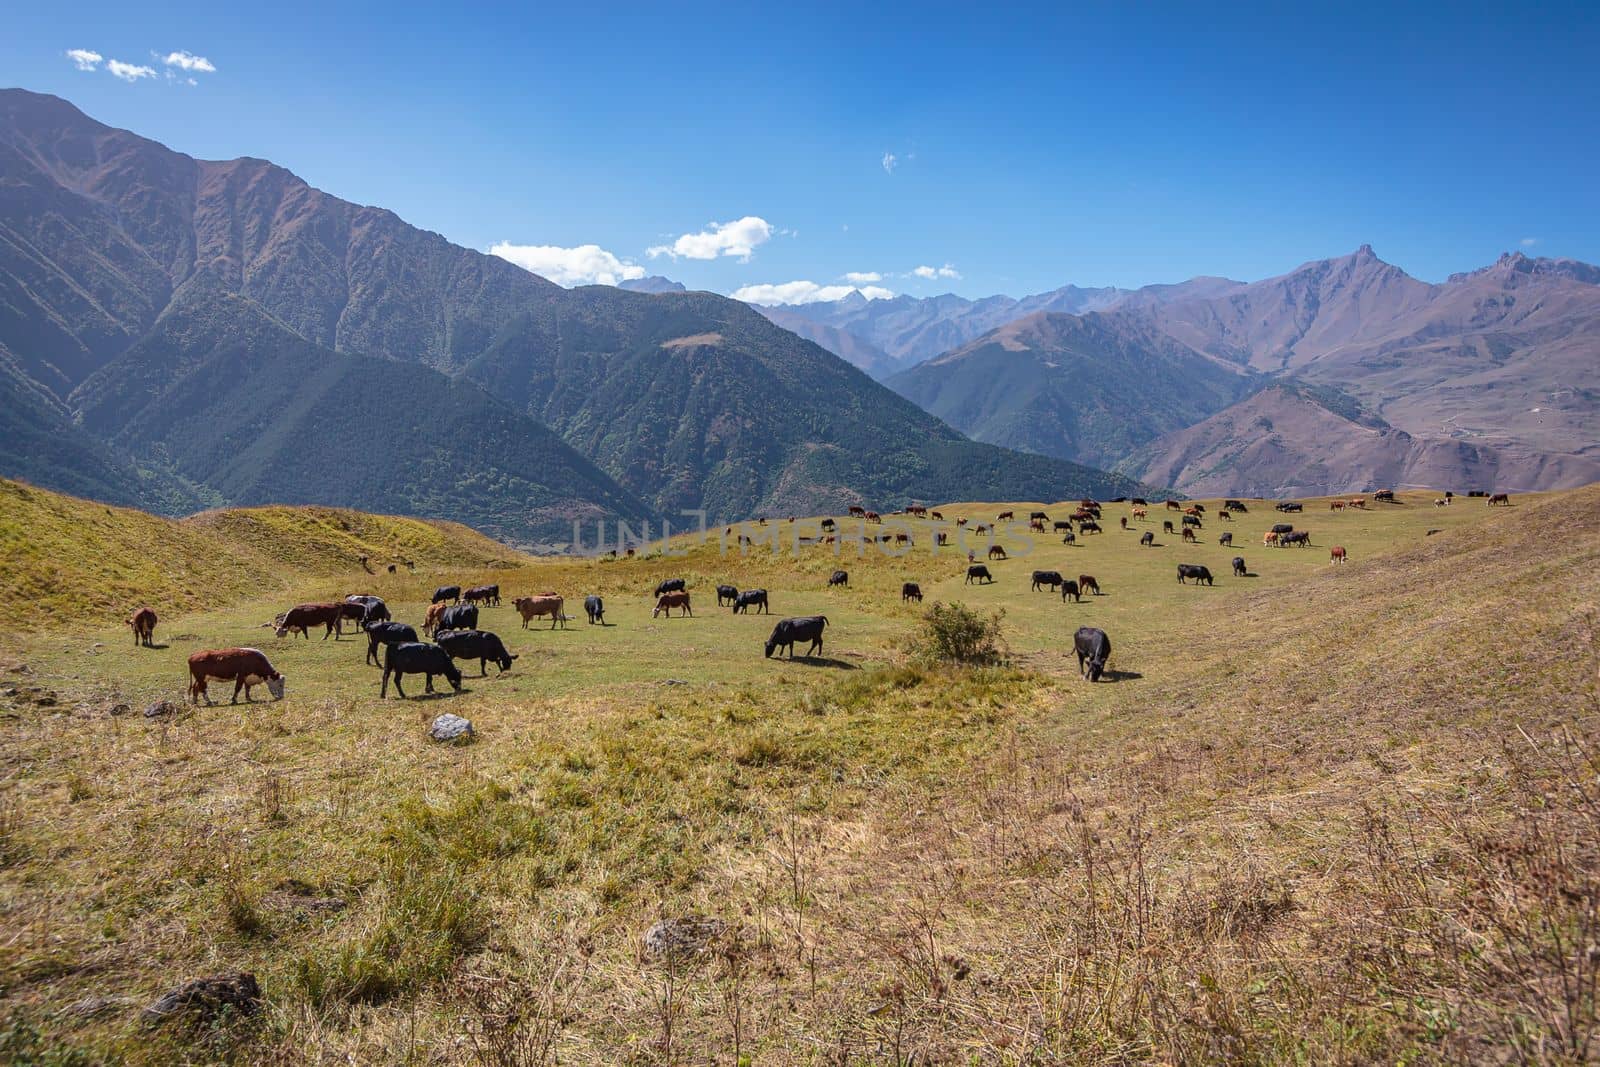 A herd of cows grazes in the meadows of the Caucasus Mountains. by Yurich32